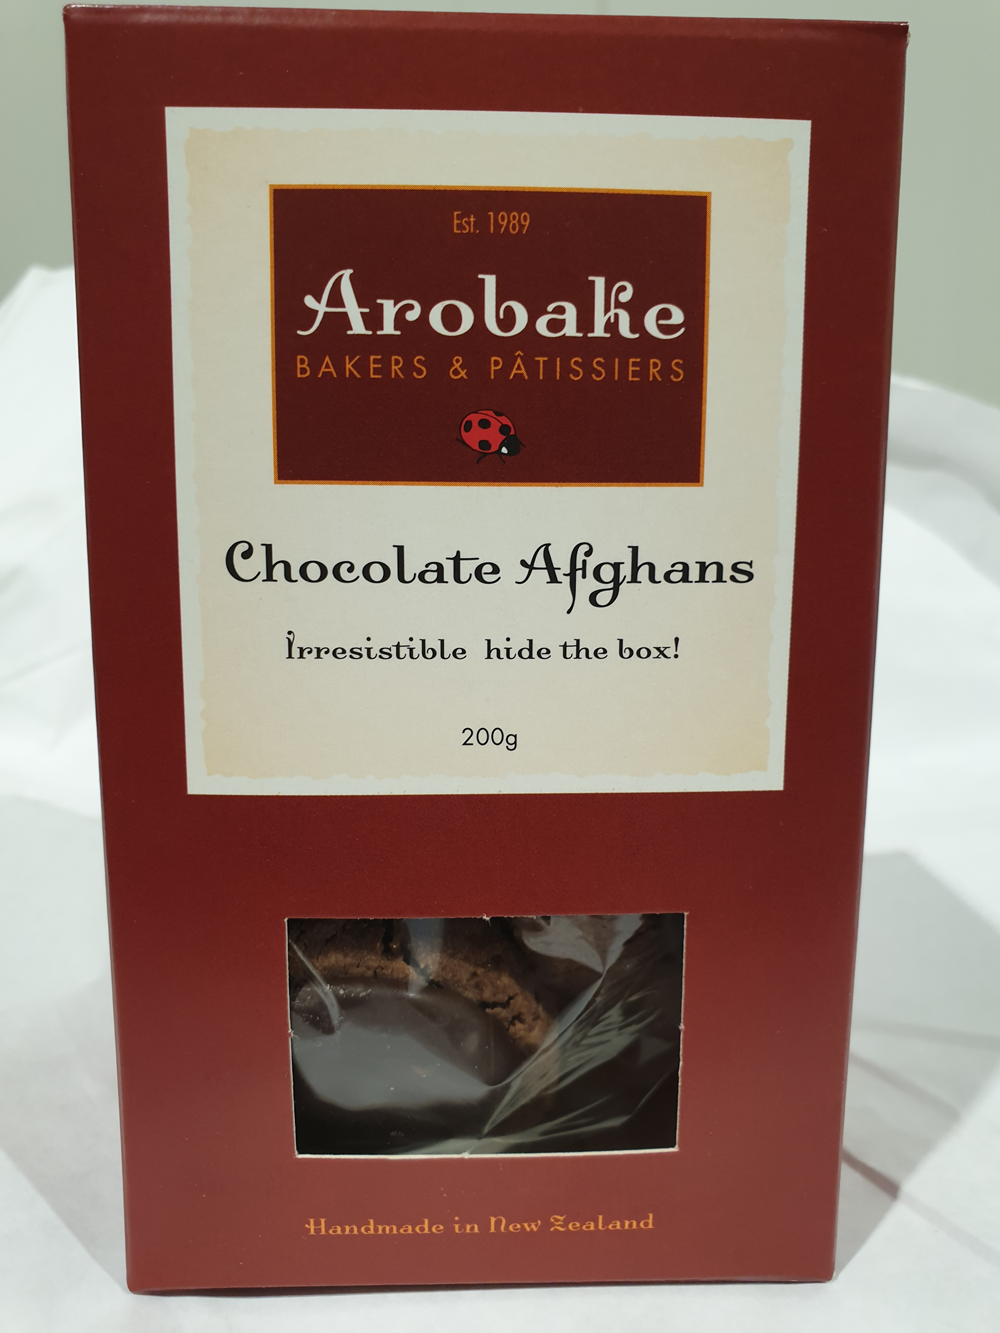 A box of Arobake brand Chocolate Afghans Biscuits (200g).